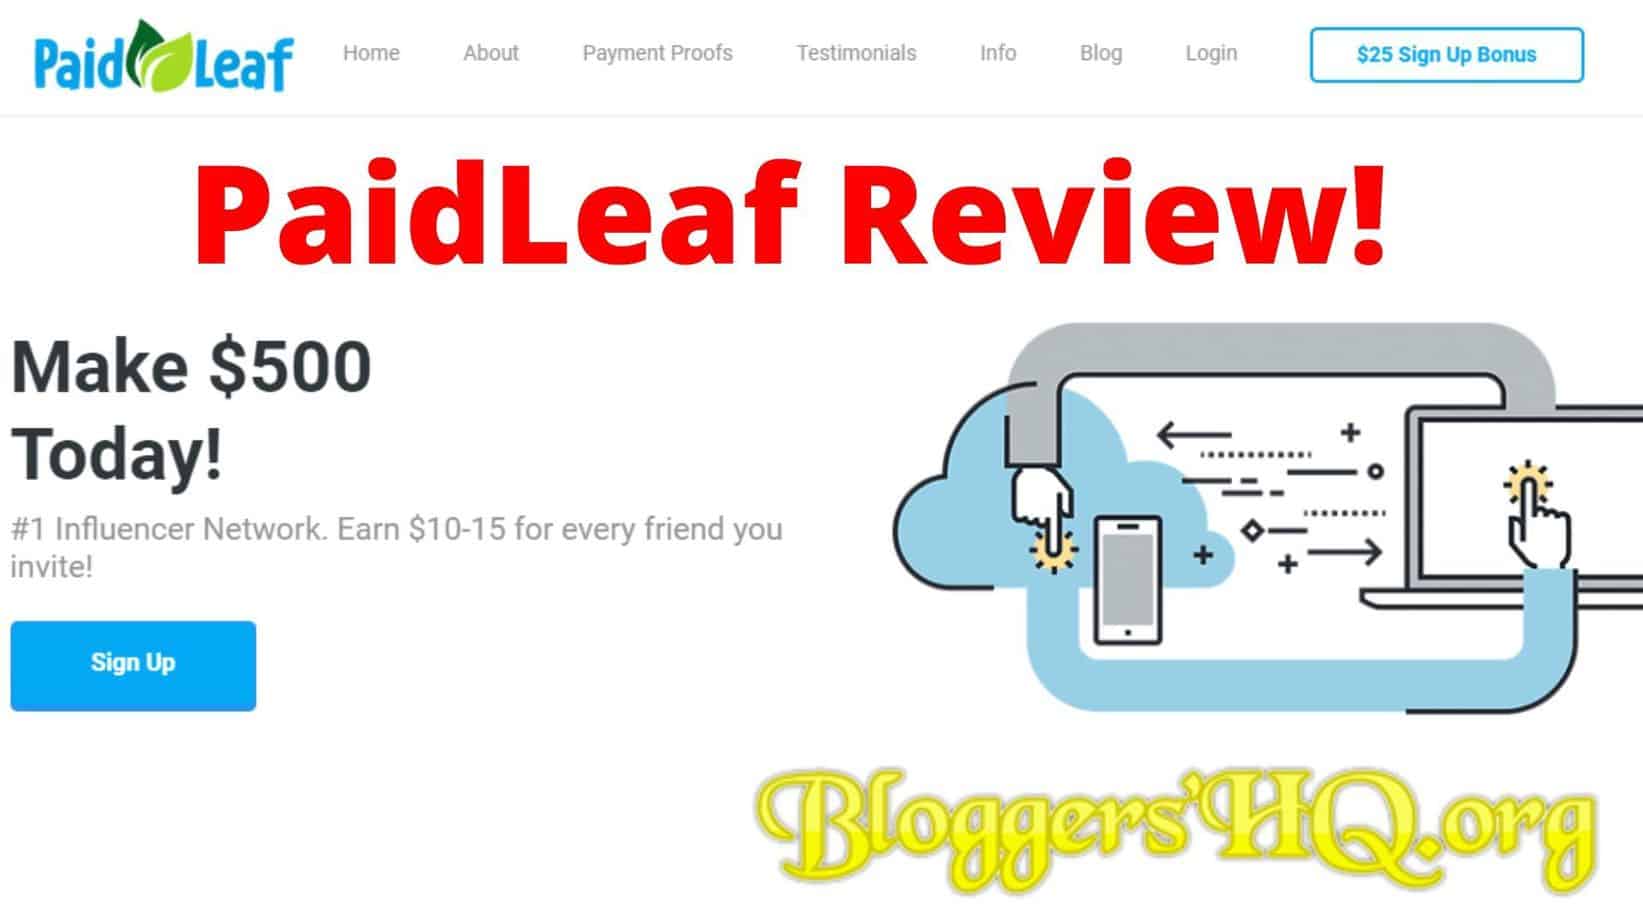 PaidLeaf Review